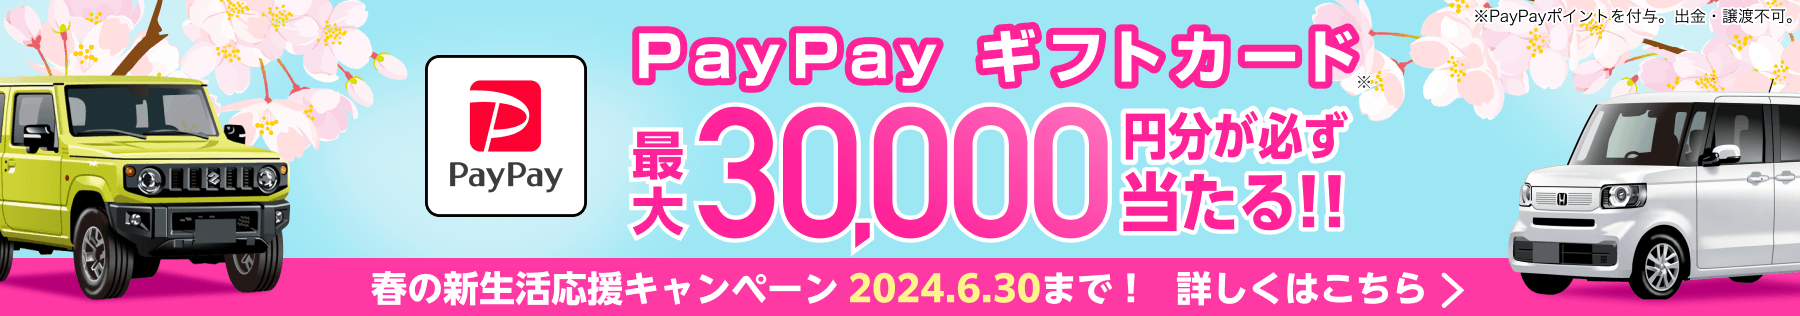 PayPayギフトカード 最大3万円分が必ず当たる！春の新生活応援キャンペーン 2024.6.30まで！